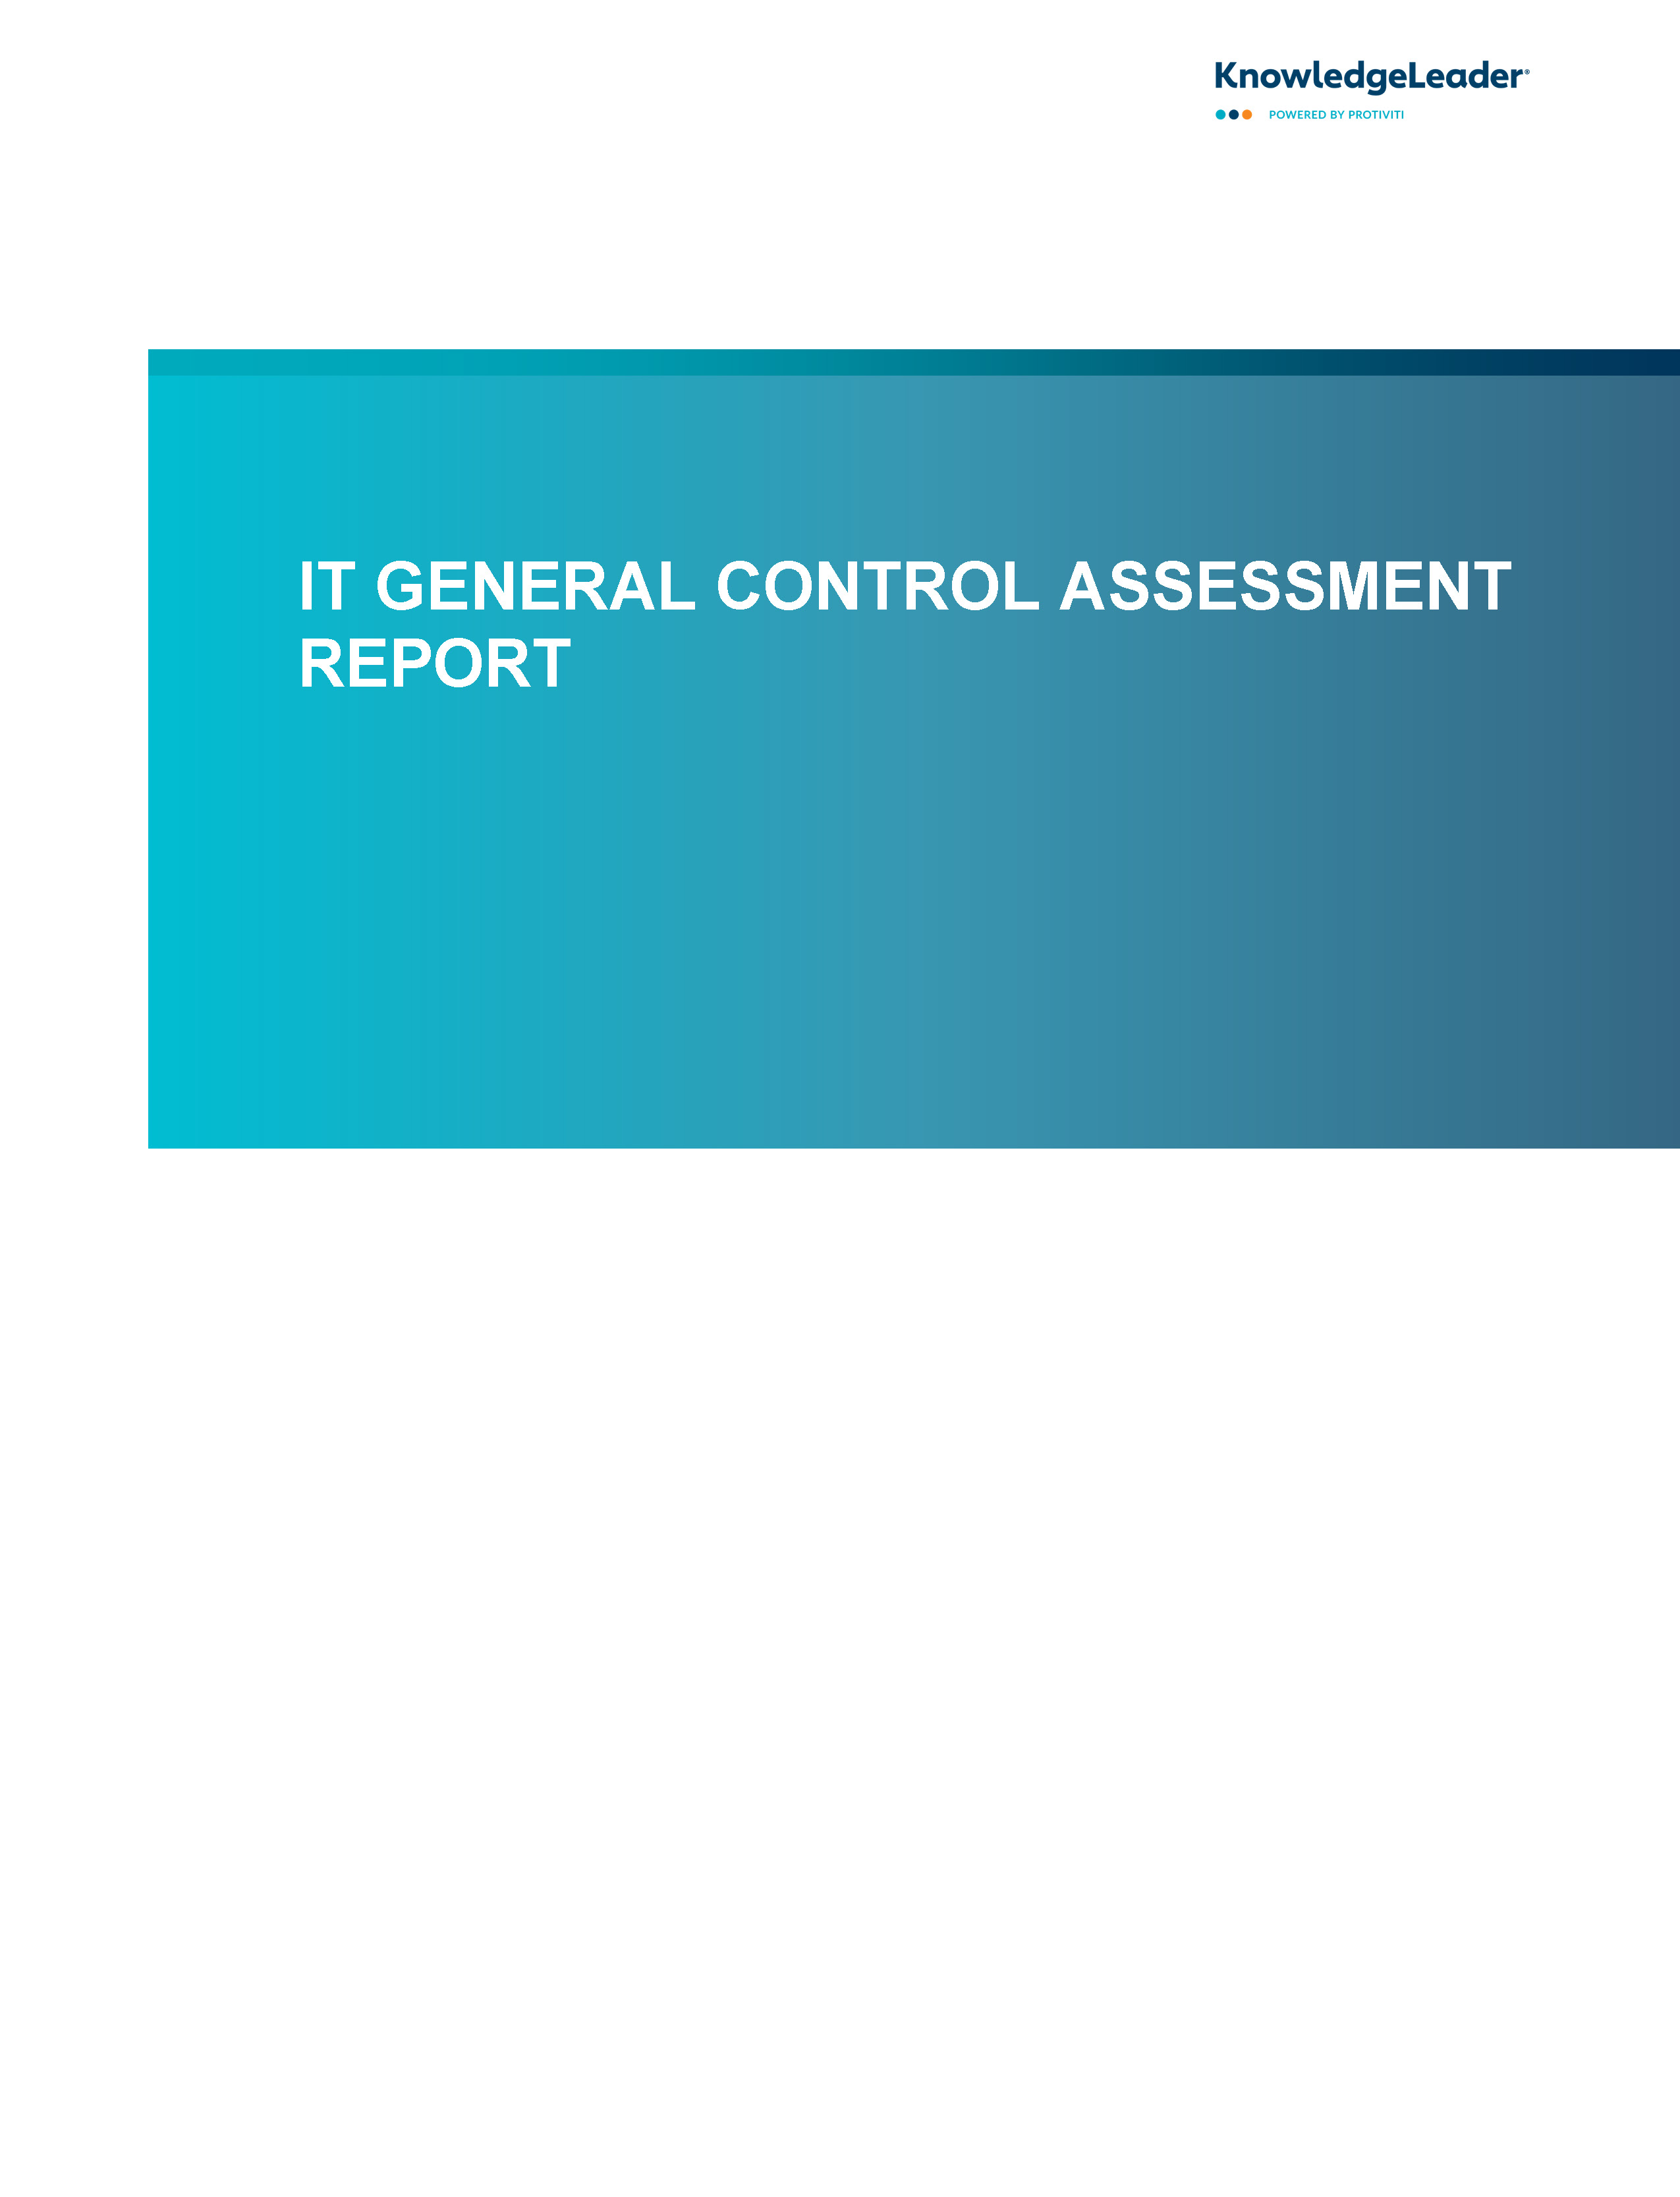 Screenshot of the first page of IT General Control Assessment Report